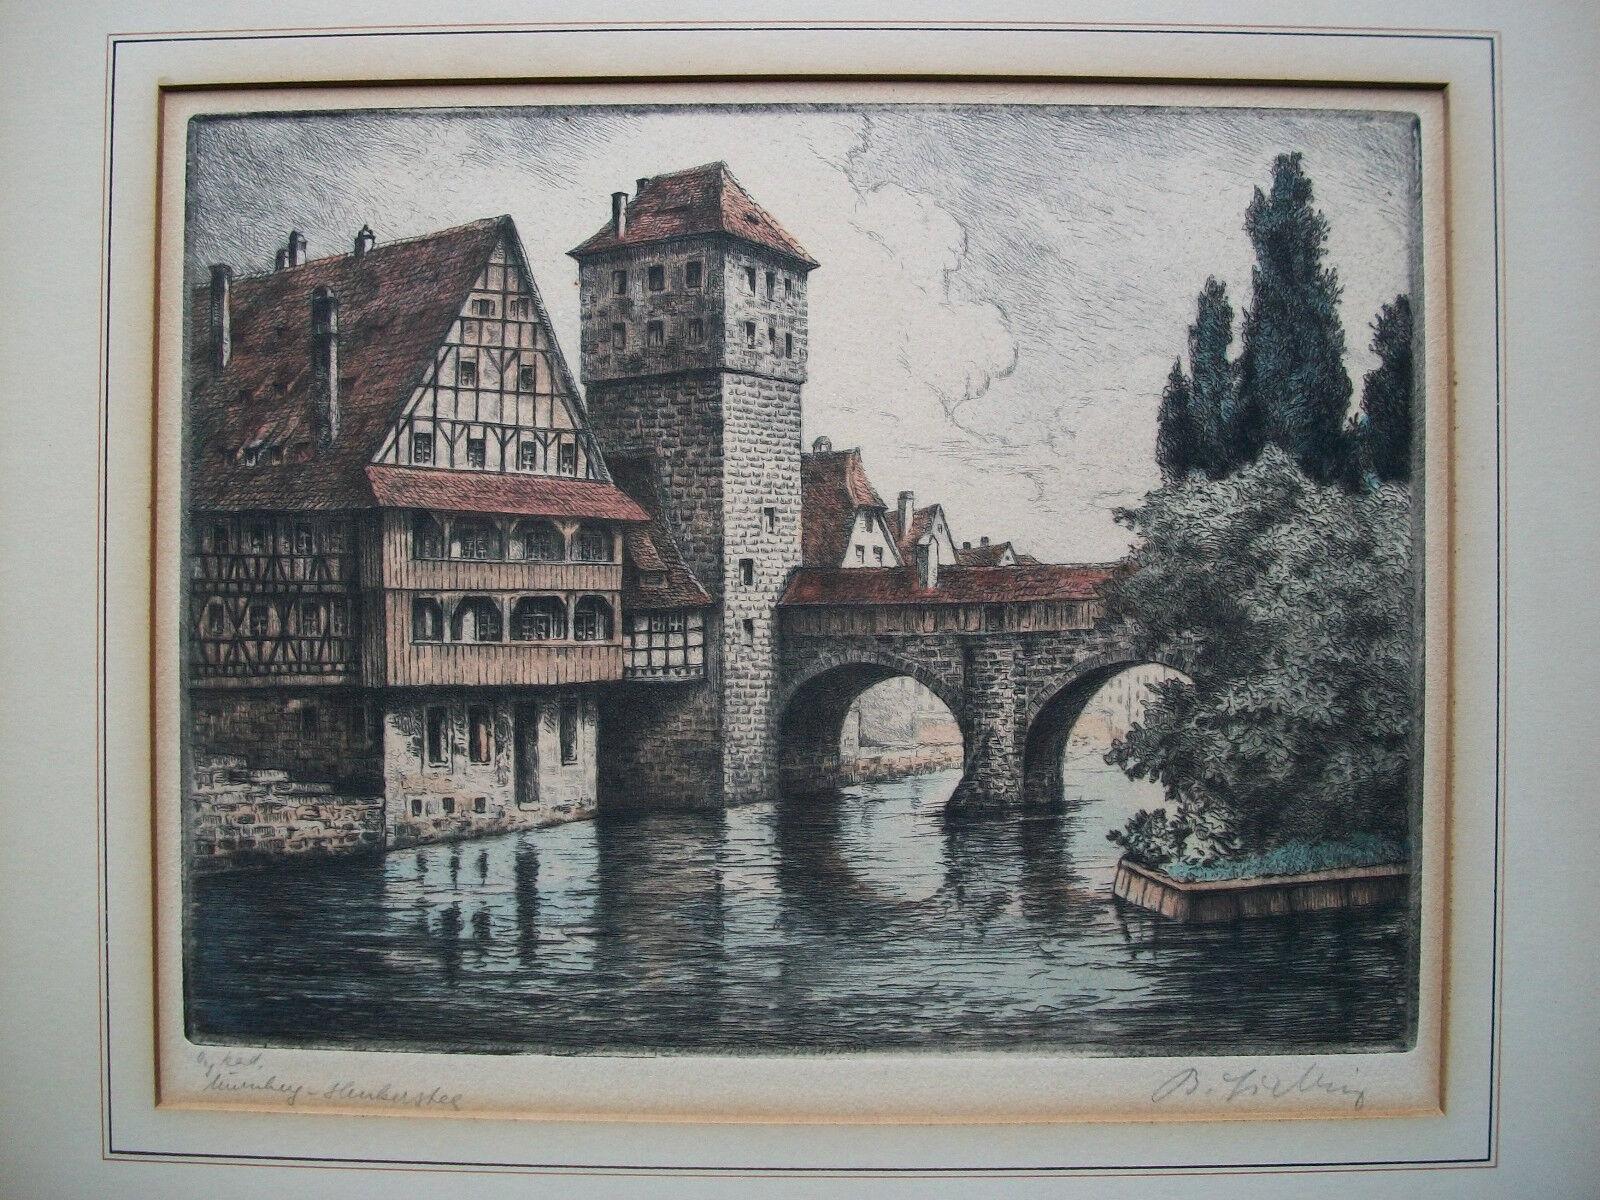 Hangman's Bridge (Henkersteg), Nuremberg, Bavaria, Germany - Antique fine art hand colored engraving on heavy cream paper - architectural view - indistinctly signed by the artist lower right - indistinctly titled in pencil lower left corner - circa